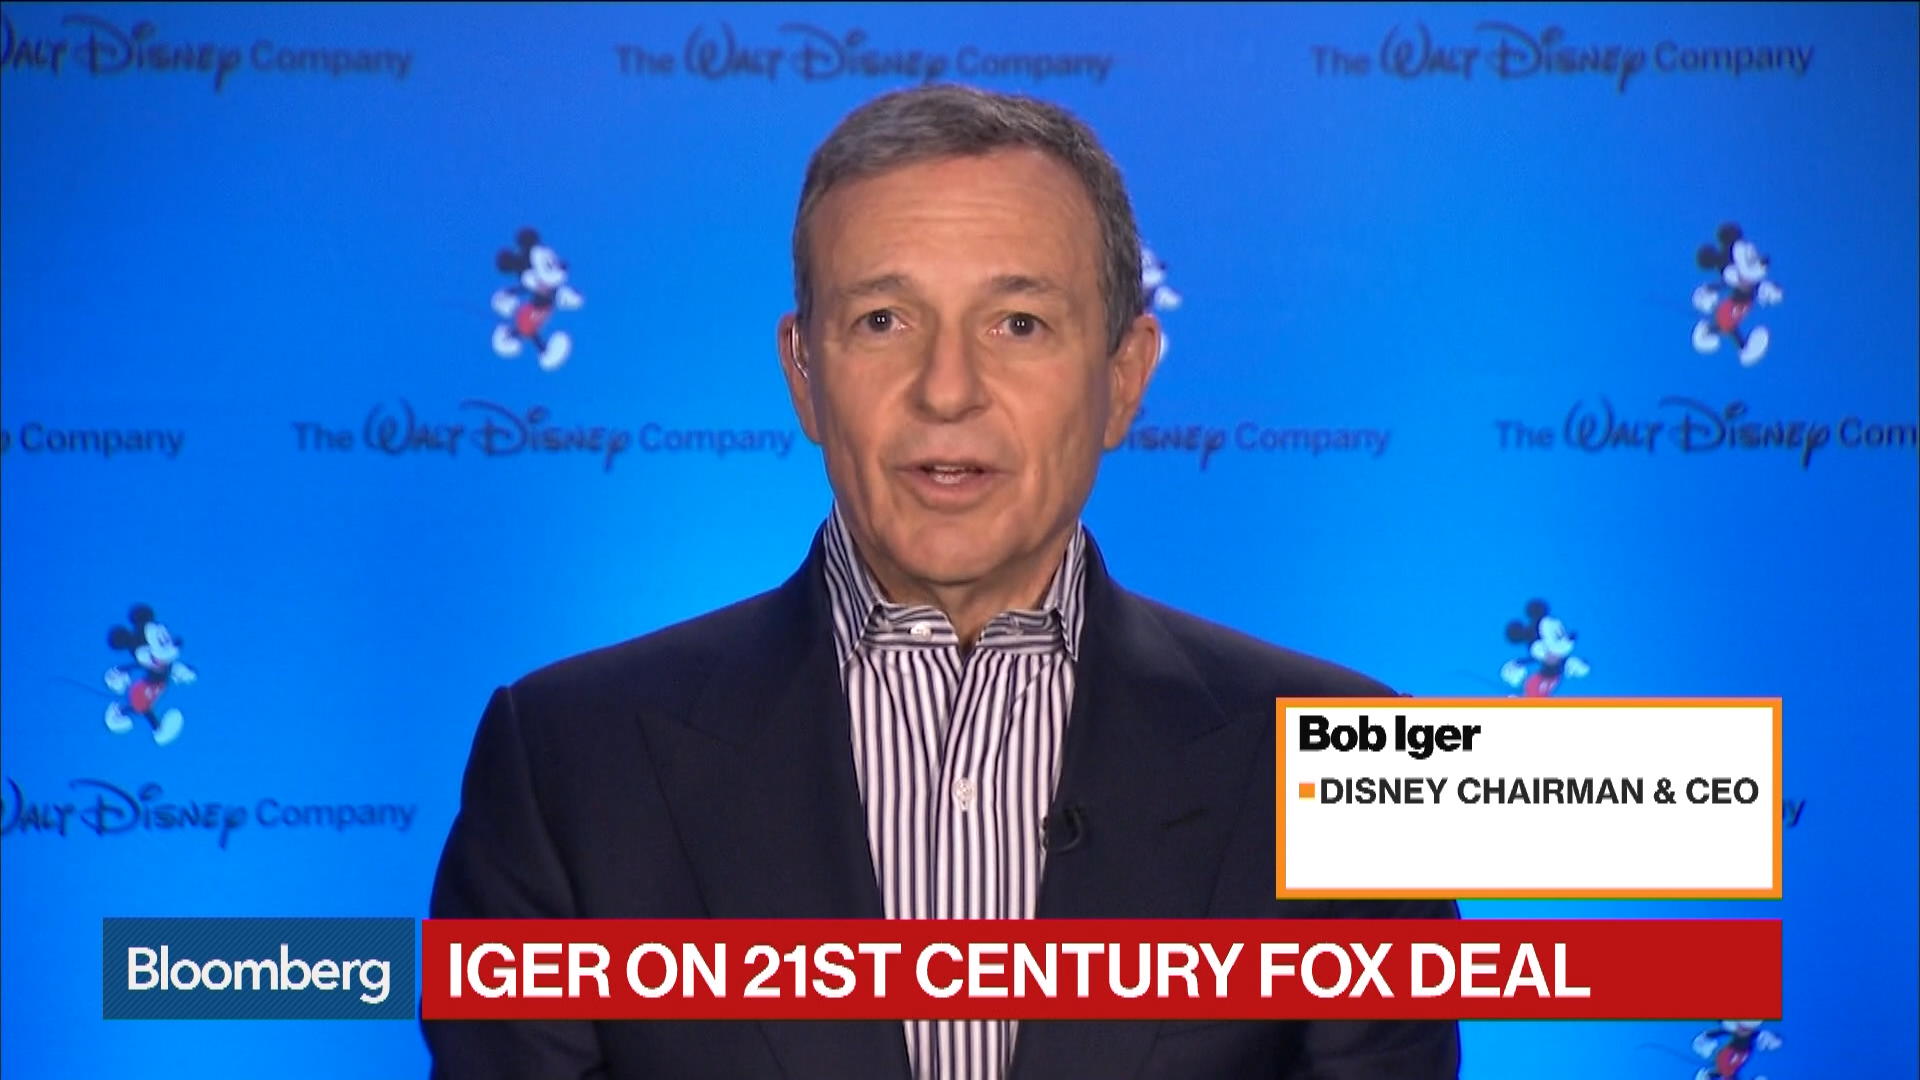 Avatar 2' to Show Value of Fox Deal for Disney, Bob Iger - Bloomberg